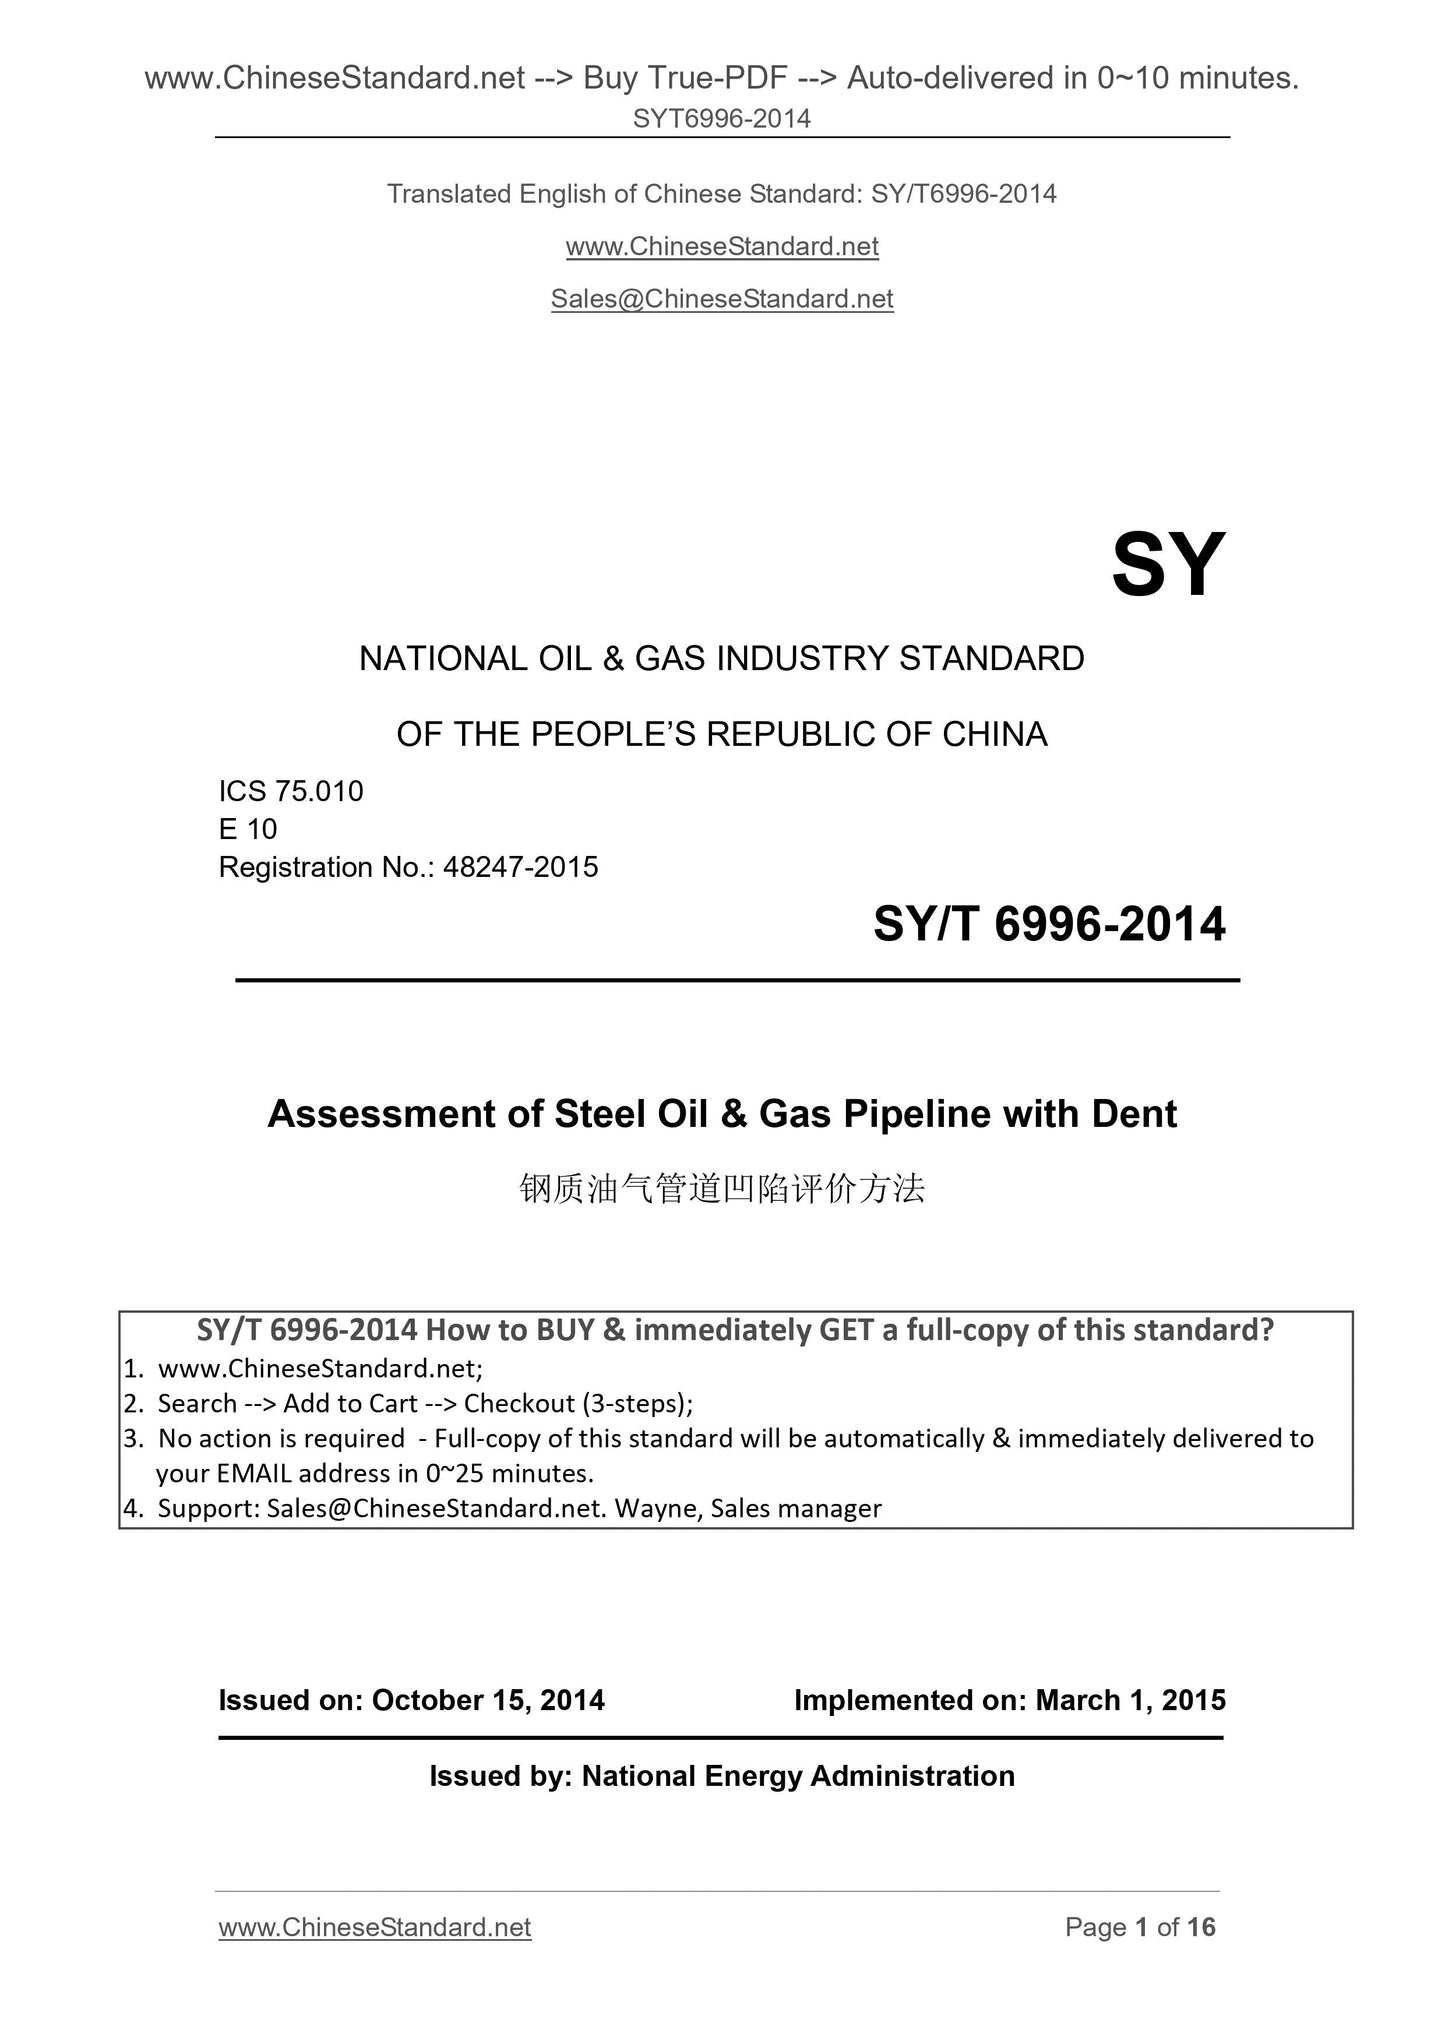 SY/T 6996-2014 Page 1